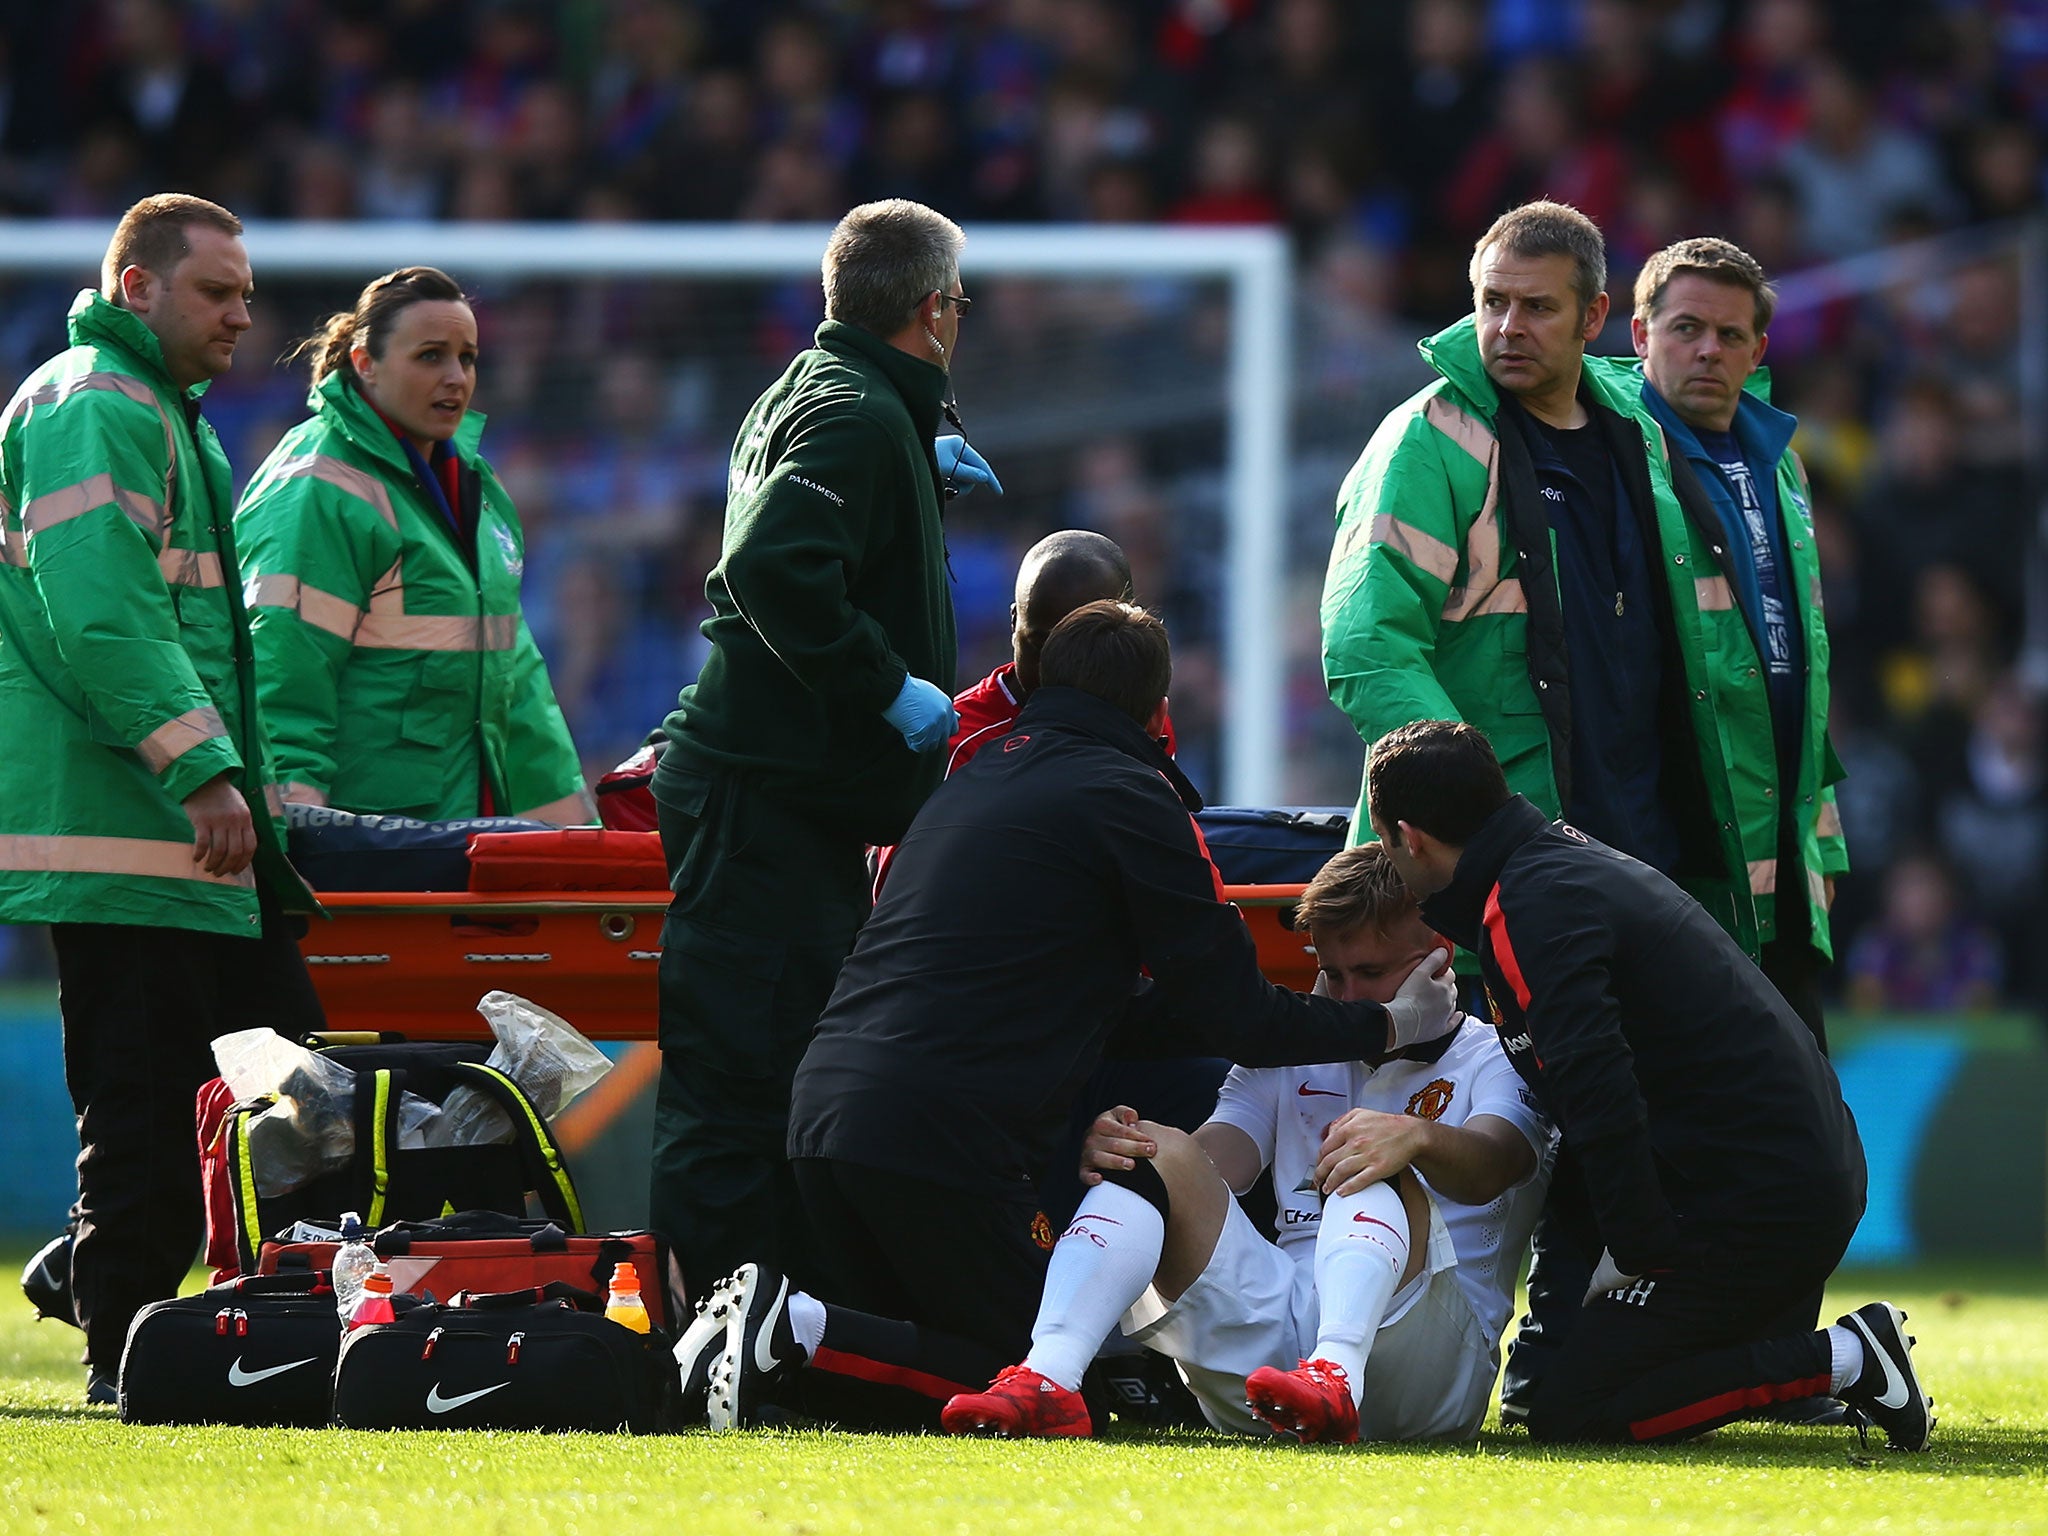 Shaw was carried off against Crystal Palace on 9 May and will not play for United again this season